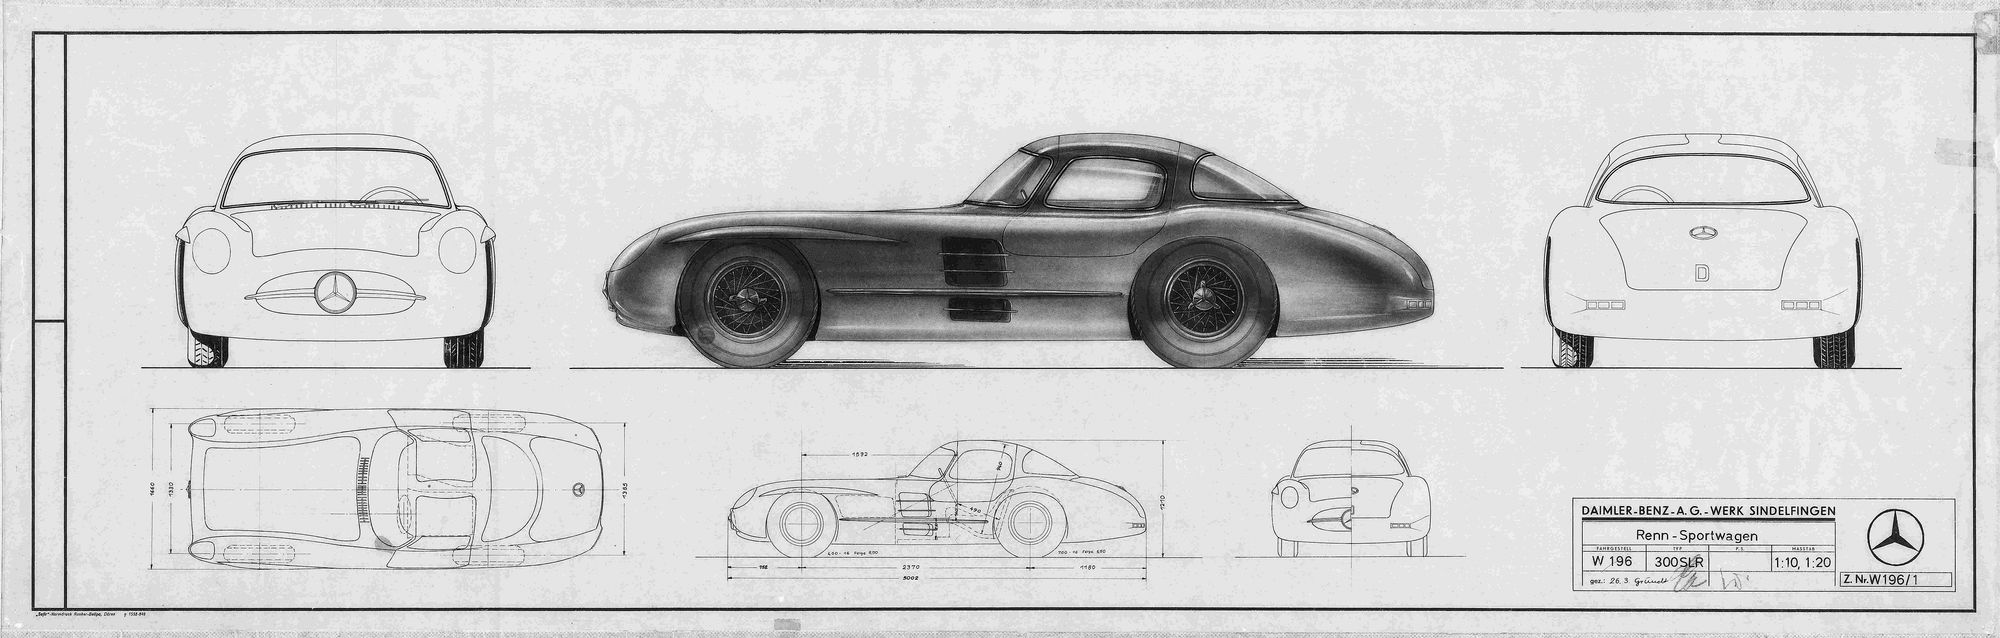 Drawings for the 300 SLR